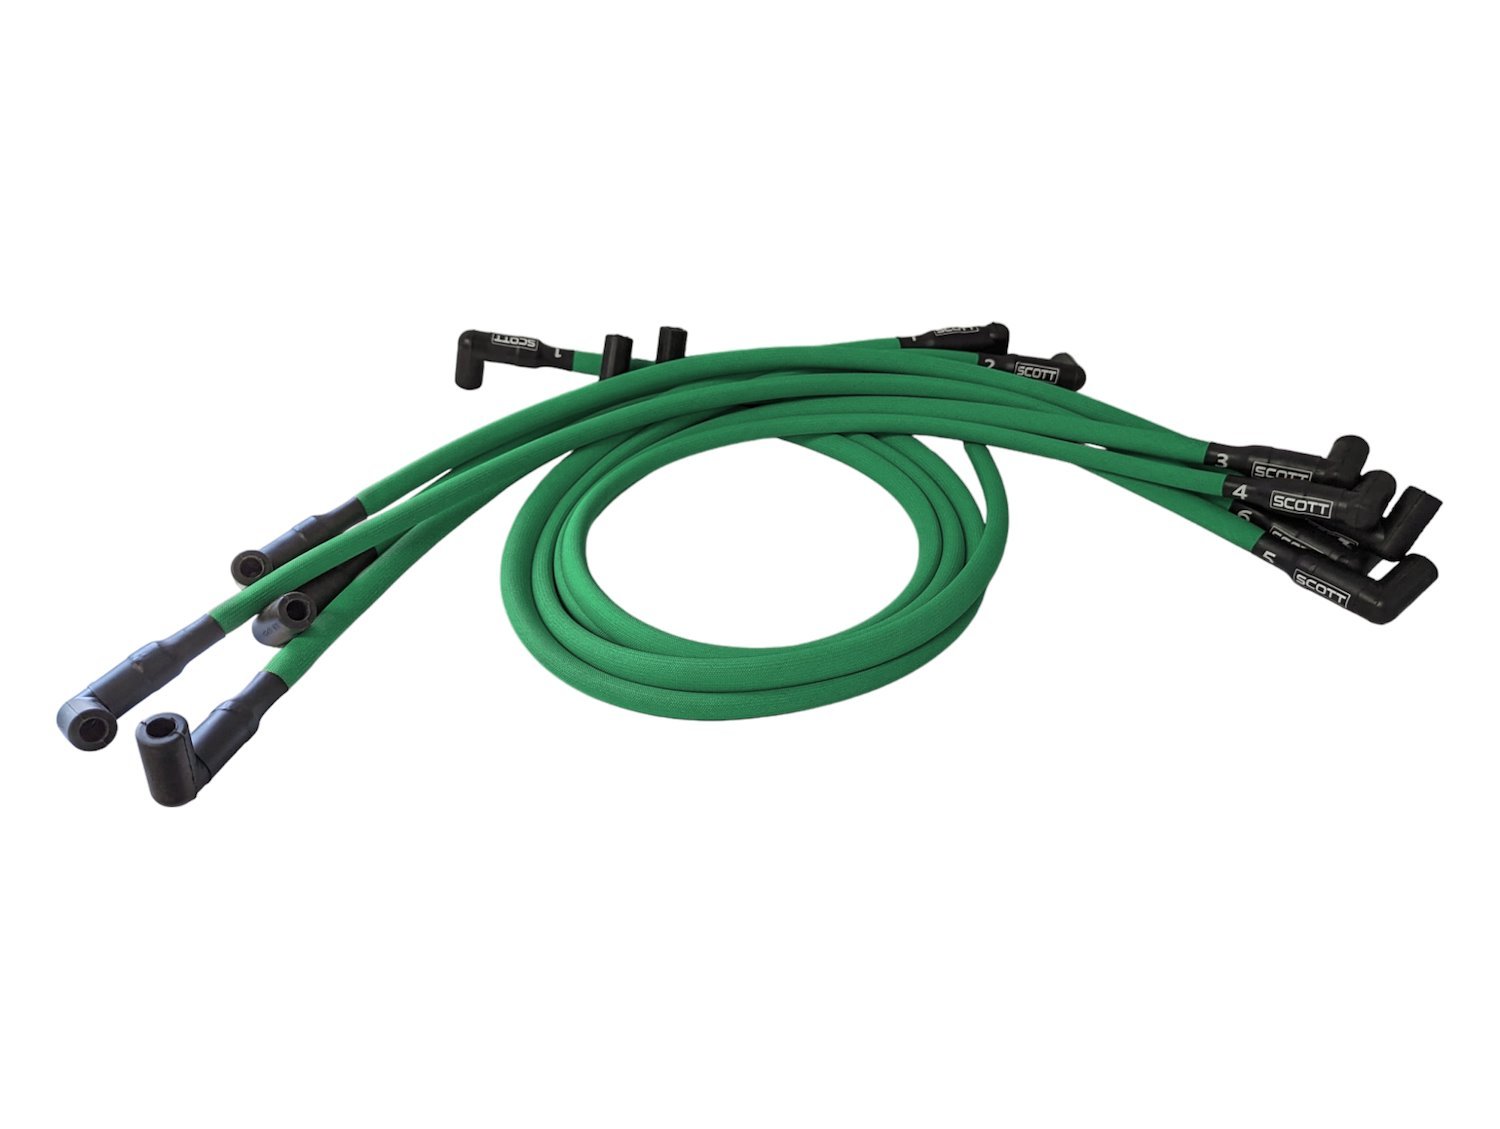 SPW-PS-604-4 High-Performance Fiberglass-Oversleeved Spark Plug Wire Set for Small Block Chevy 604 Crate, Under Header [Green]